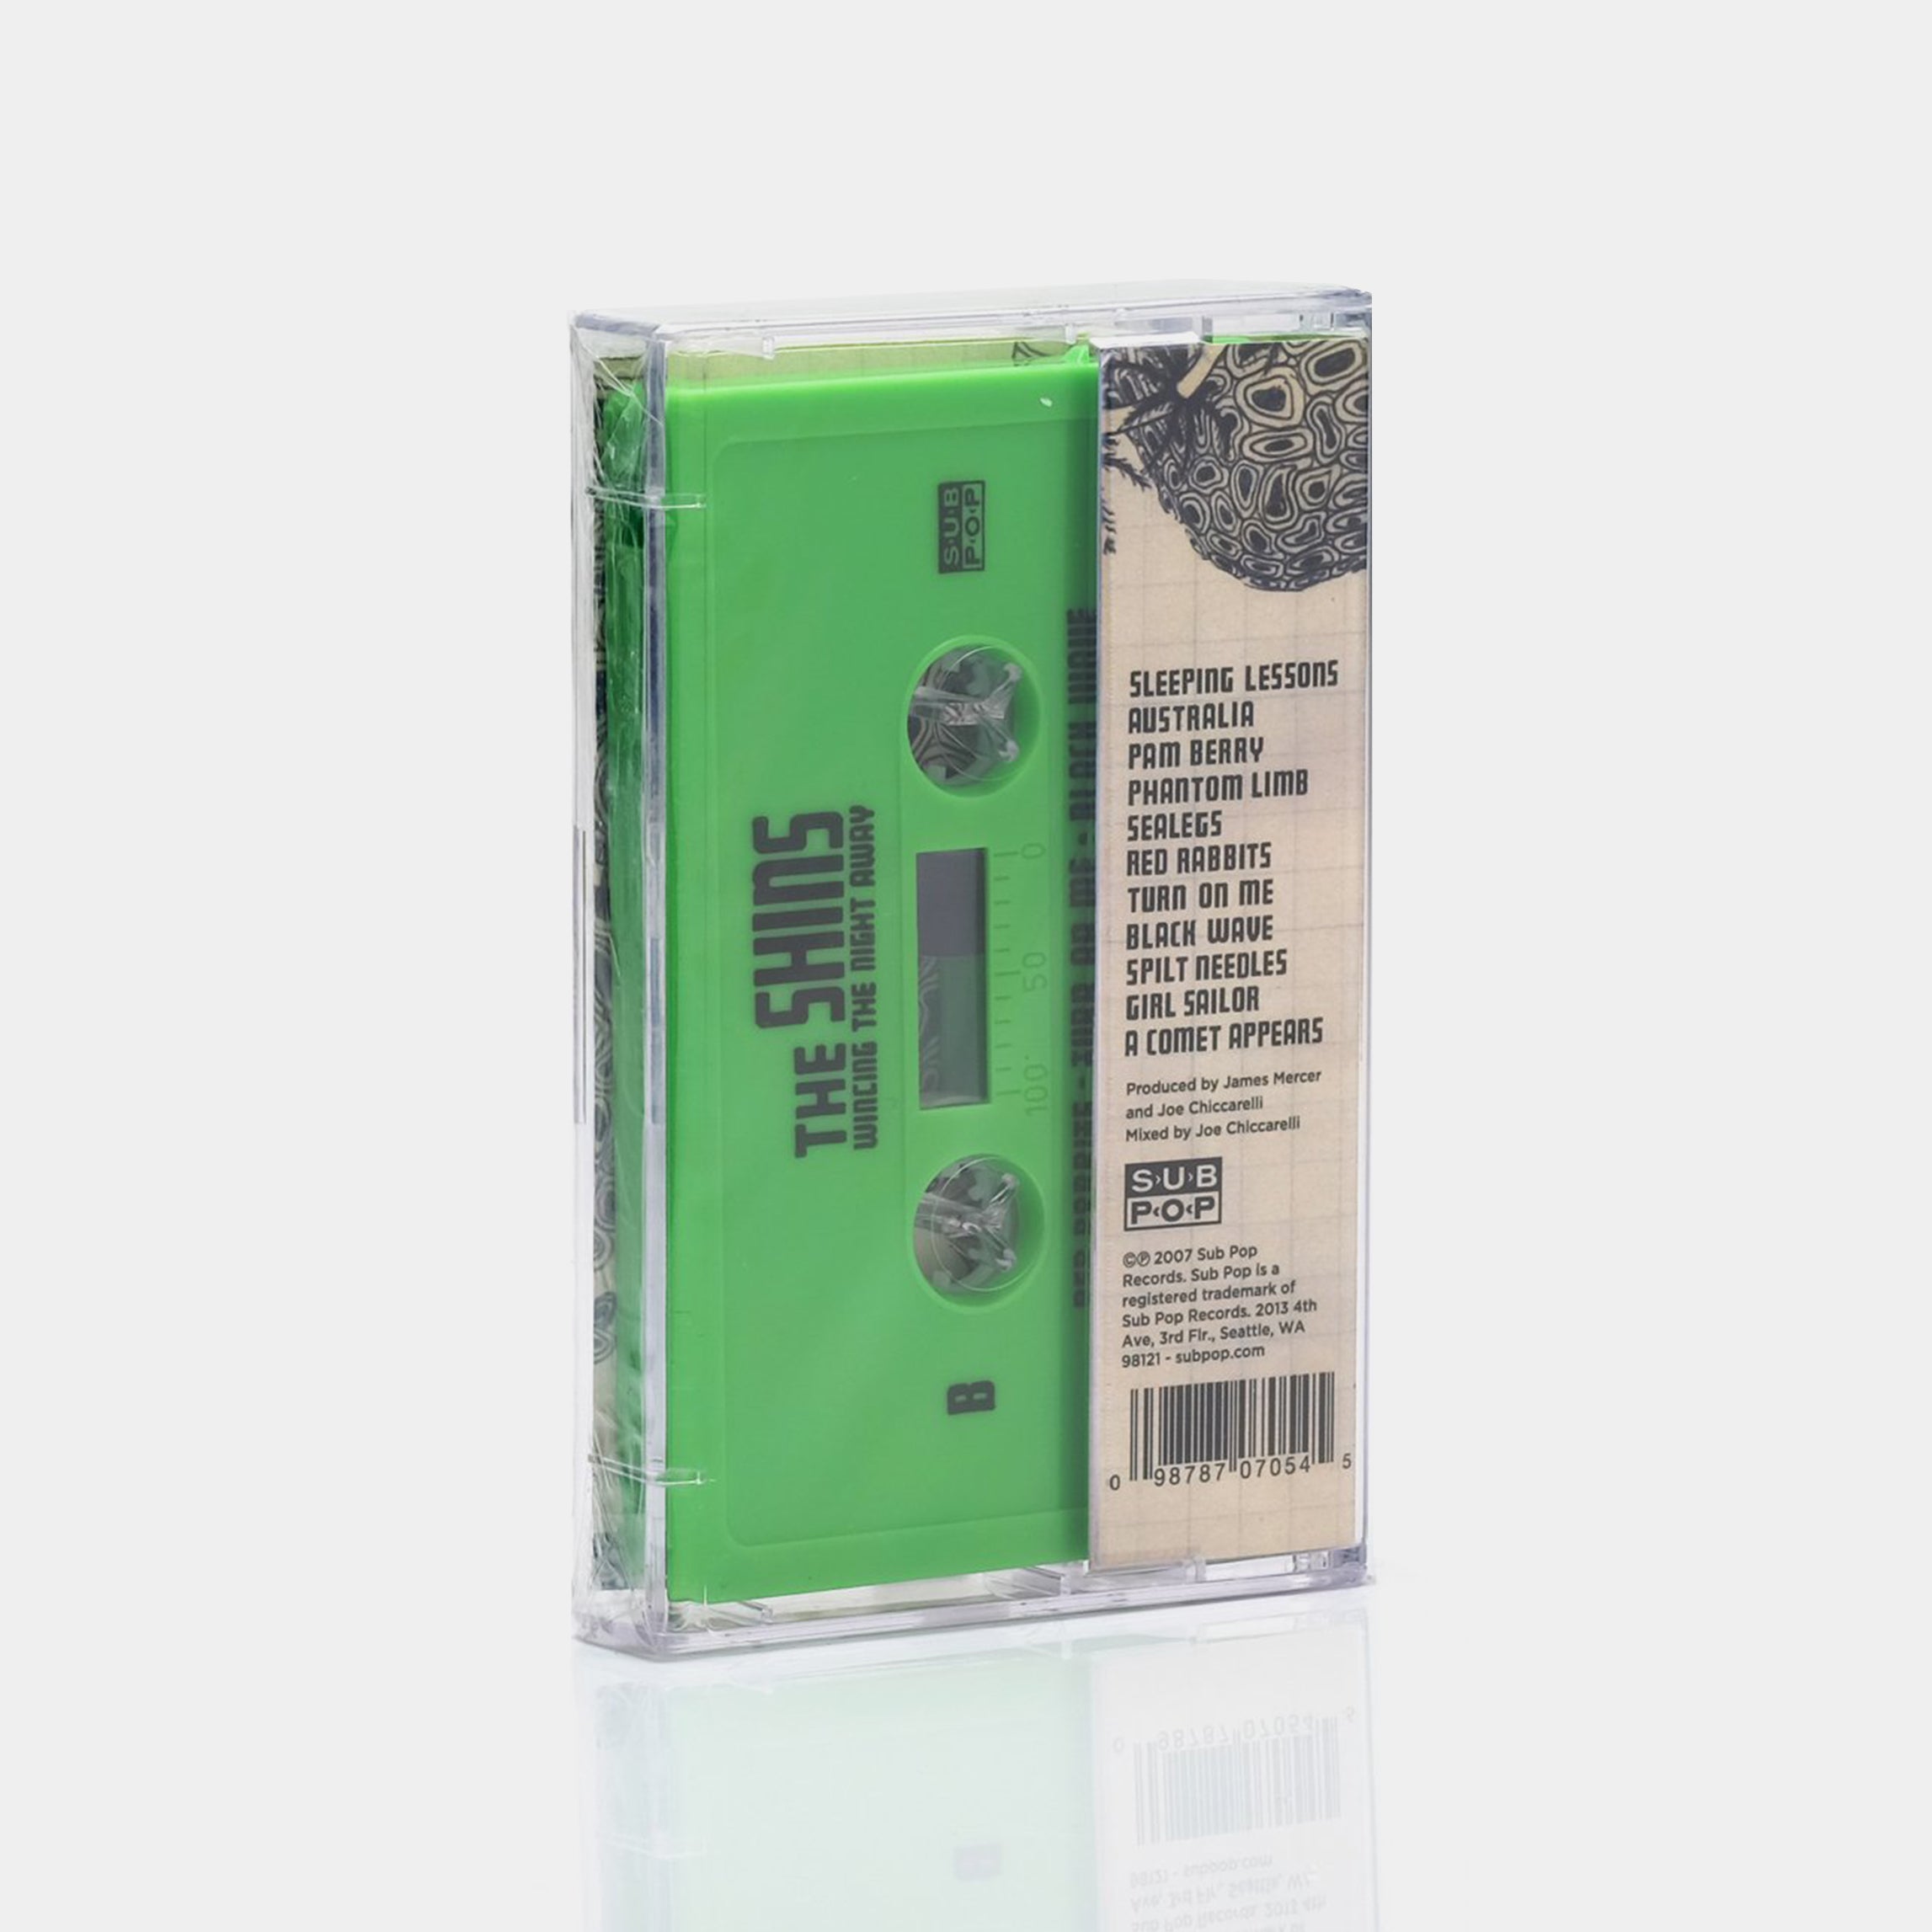 The Shins - Wincing the Night Away Cassette Tape